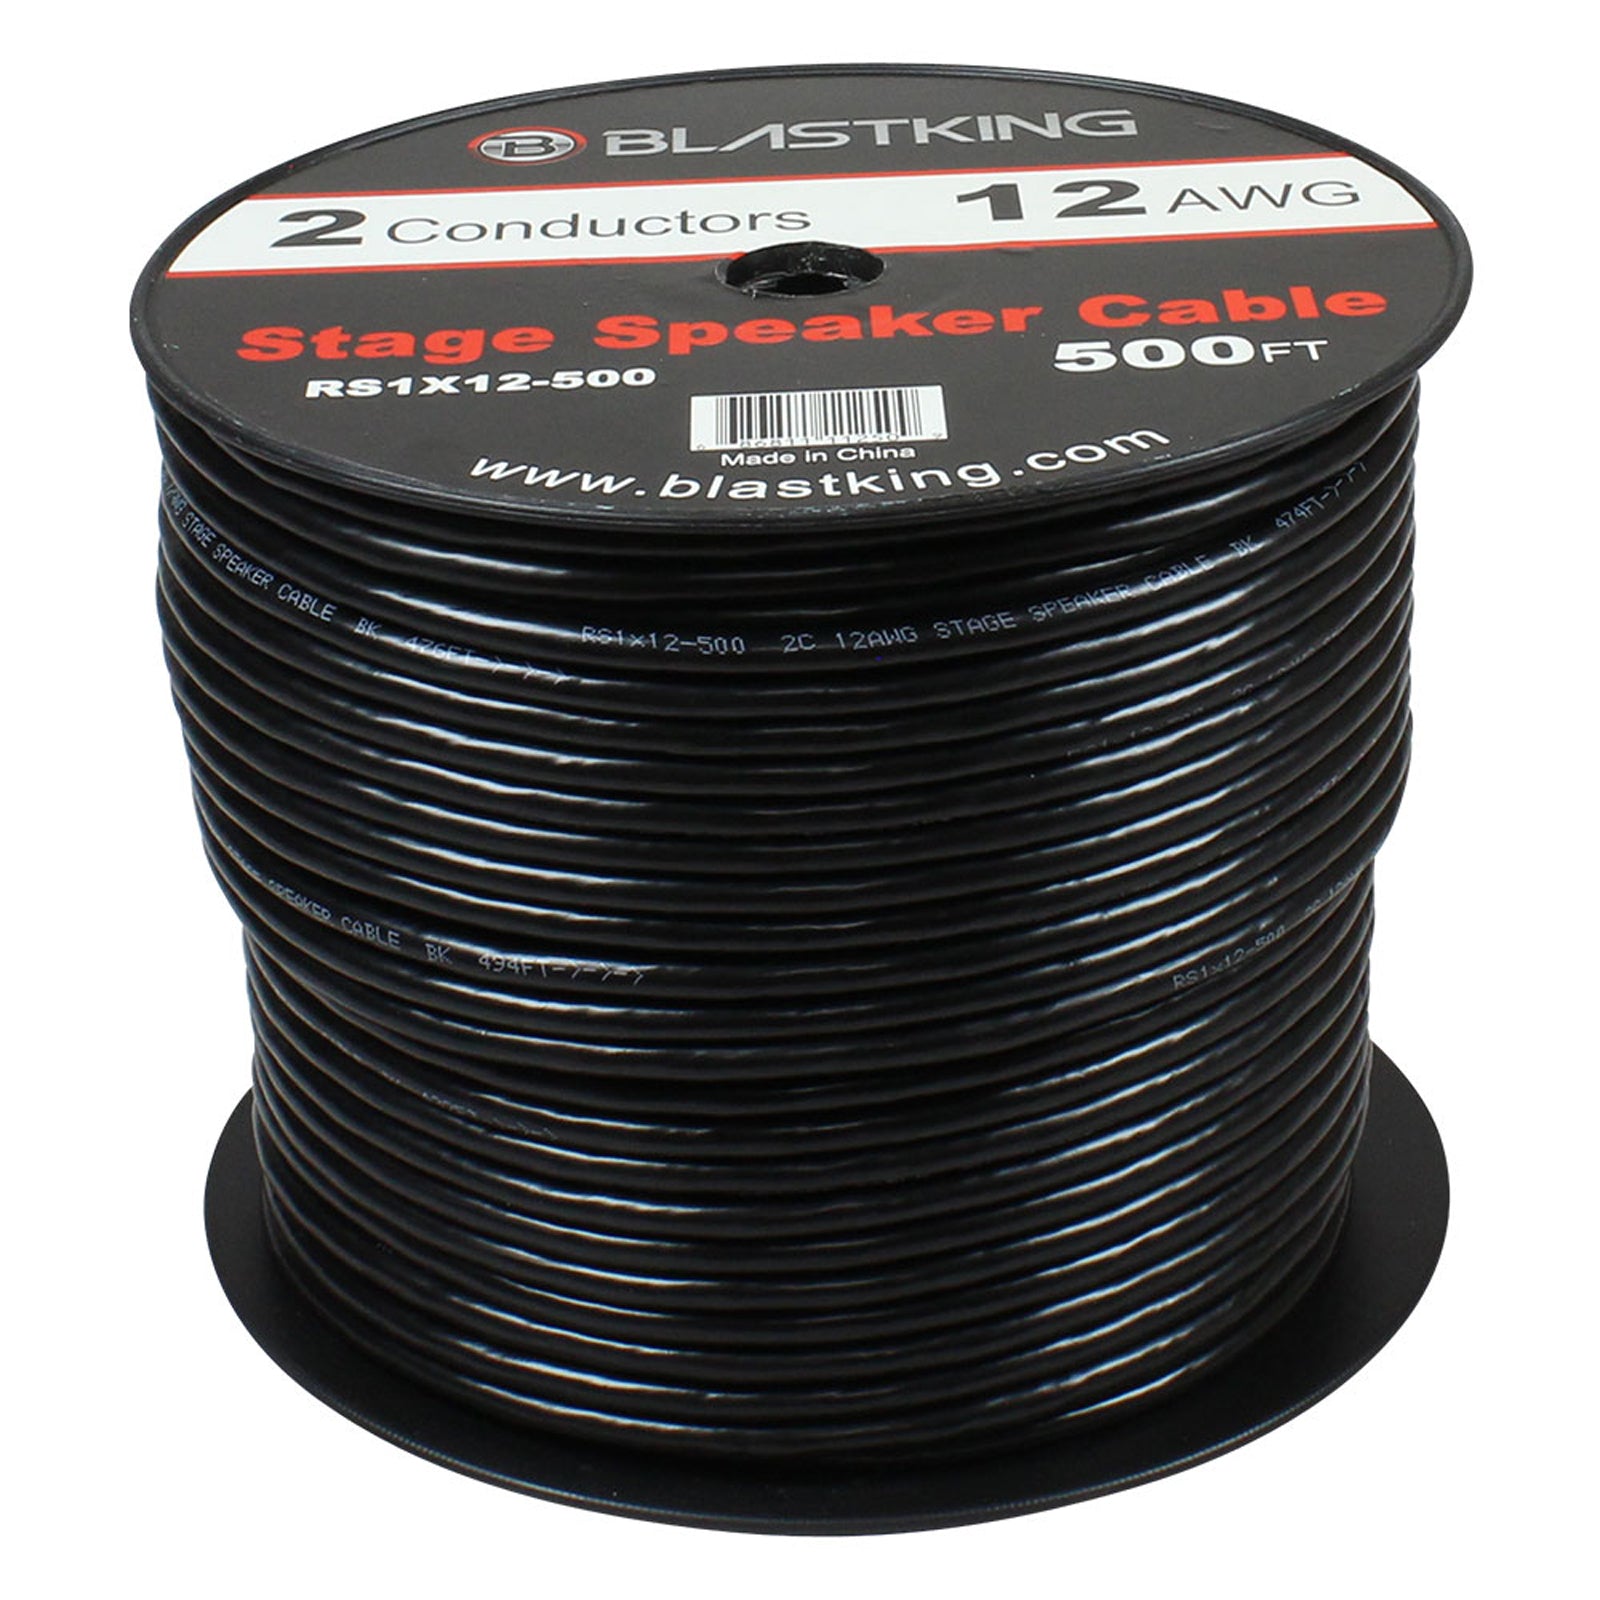 Blastking RS1X12-500 12 AWG 2-Conductor Speaker Cable 500 Ft